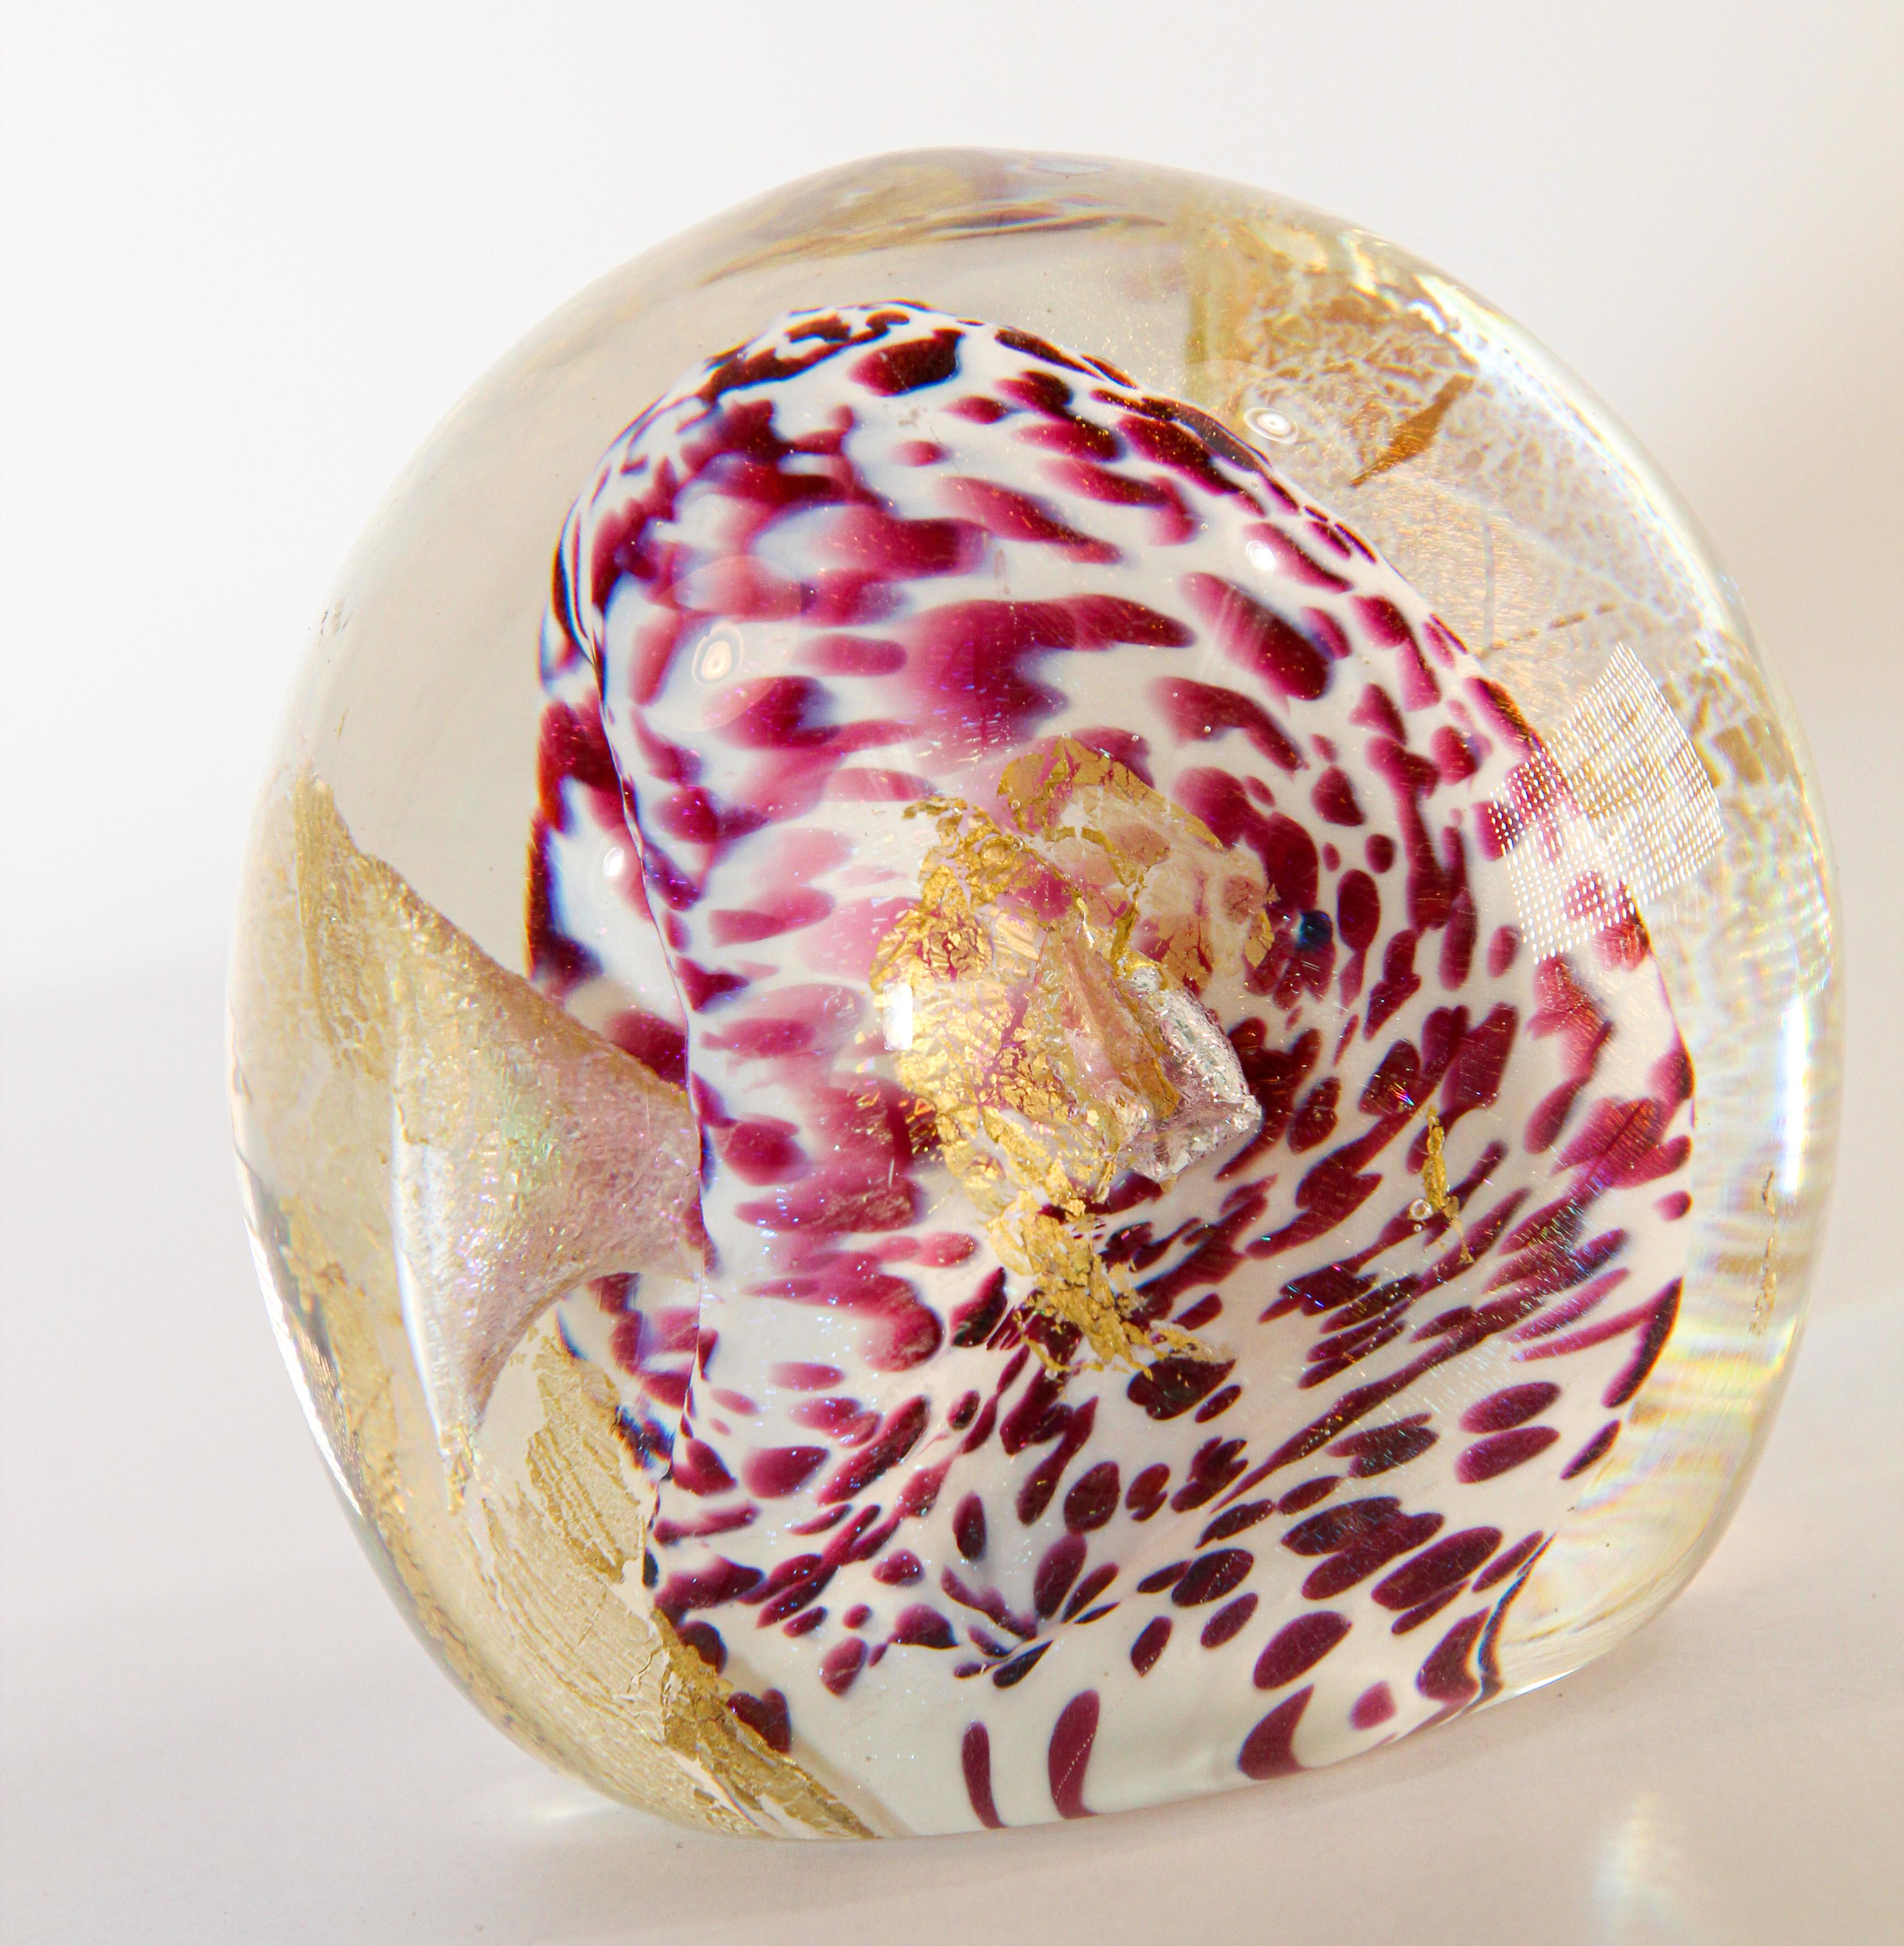 Gorgeous Vintage Art Glass 1993 abstract design paperweight. 
Beautiful handcrafted pink and white swirl Murano art glass paperweight. 
Signed by the artist dated 1993.
Measures: diameter 3 in. x 3in. height.
A beautiful nice addition to your